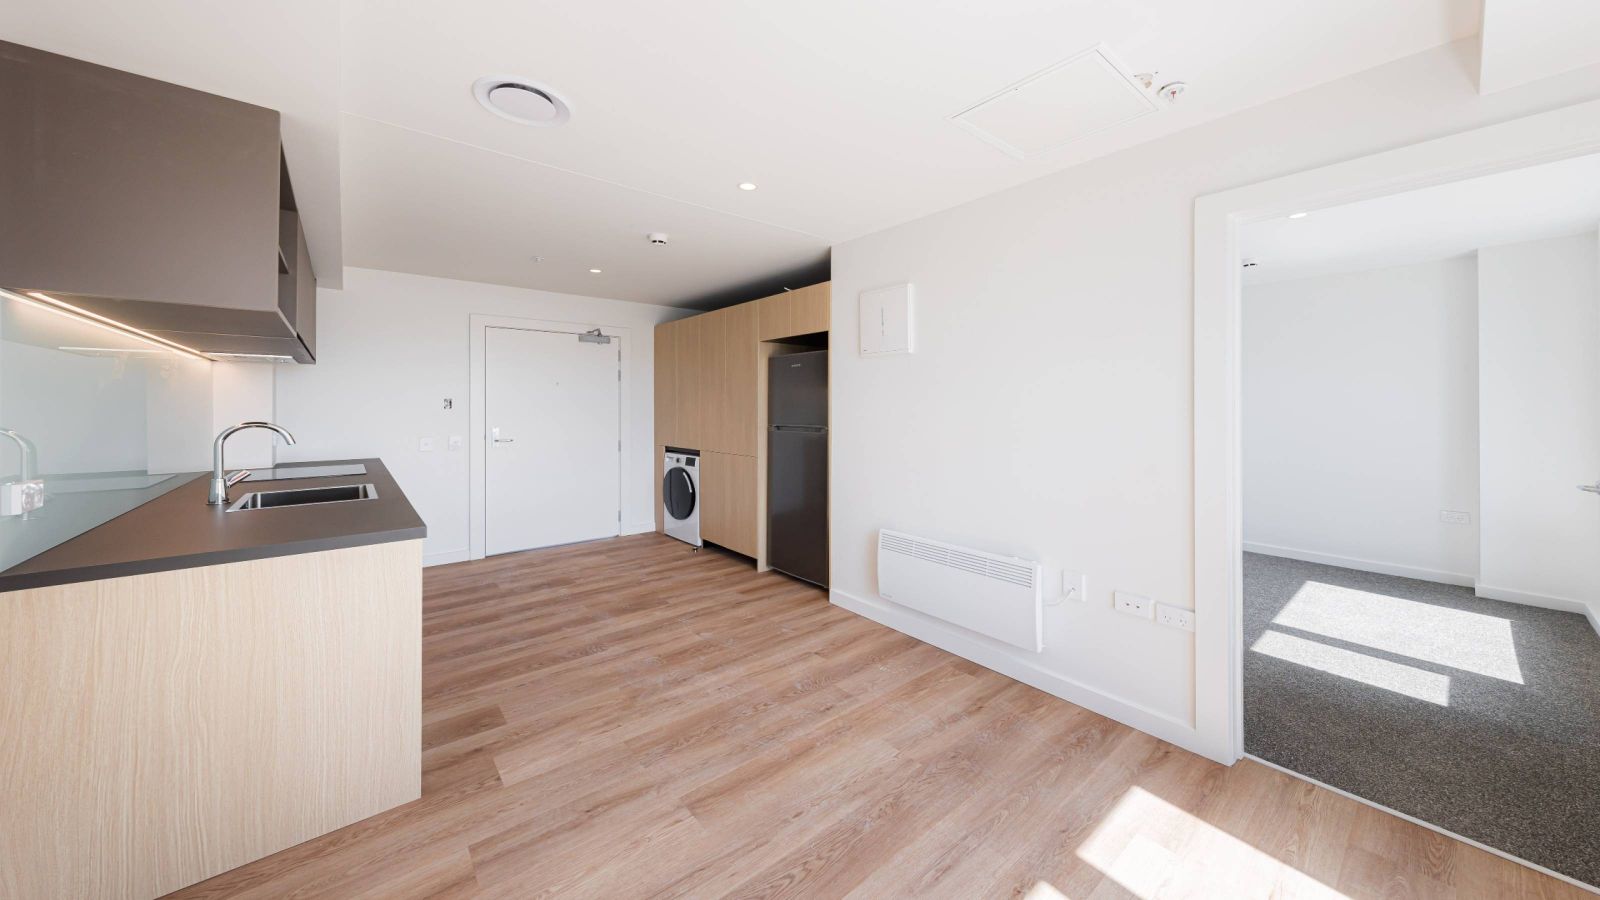 A one bedroom apartment, there is a kitchen on the left, and a washing machine and overlook of the dining area on the right. The walls are white, and there is wood flooring,